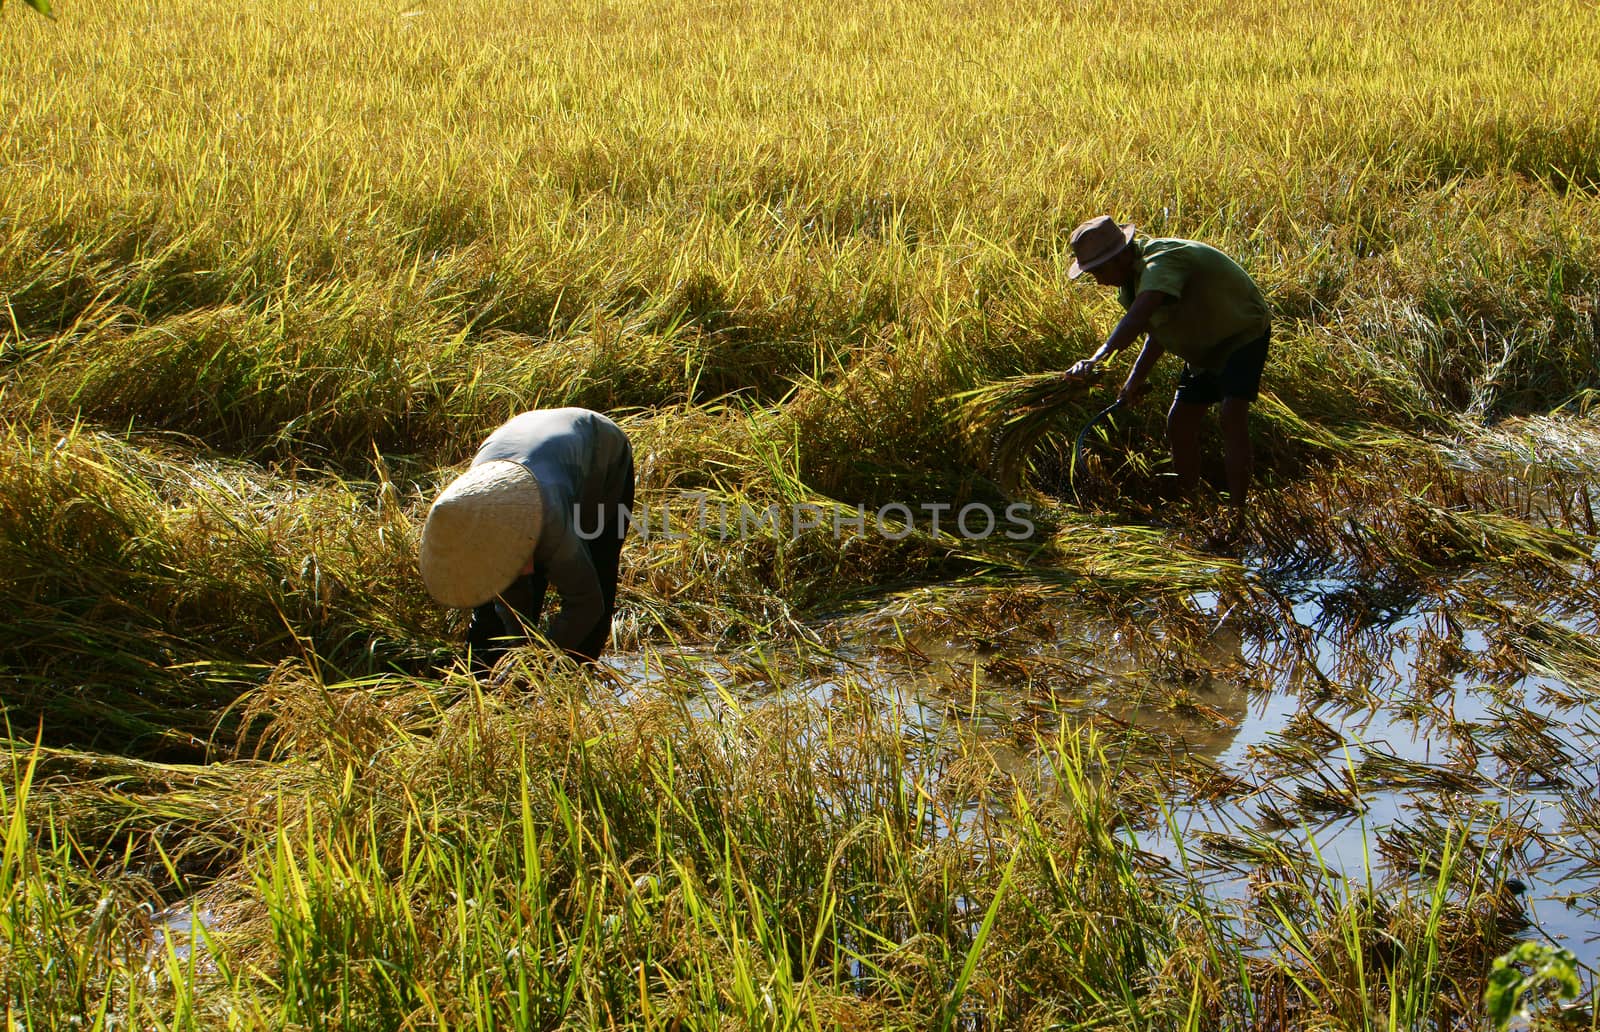 AN GIANG, VIET NAM, NOVEMBER 14: Farmers harvesting rice on paddy field, they  work in manual, cut every bunch of rice to harvest in An Giang, Viet Nam on November 14, 2013